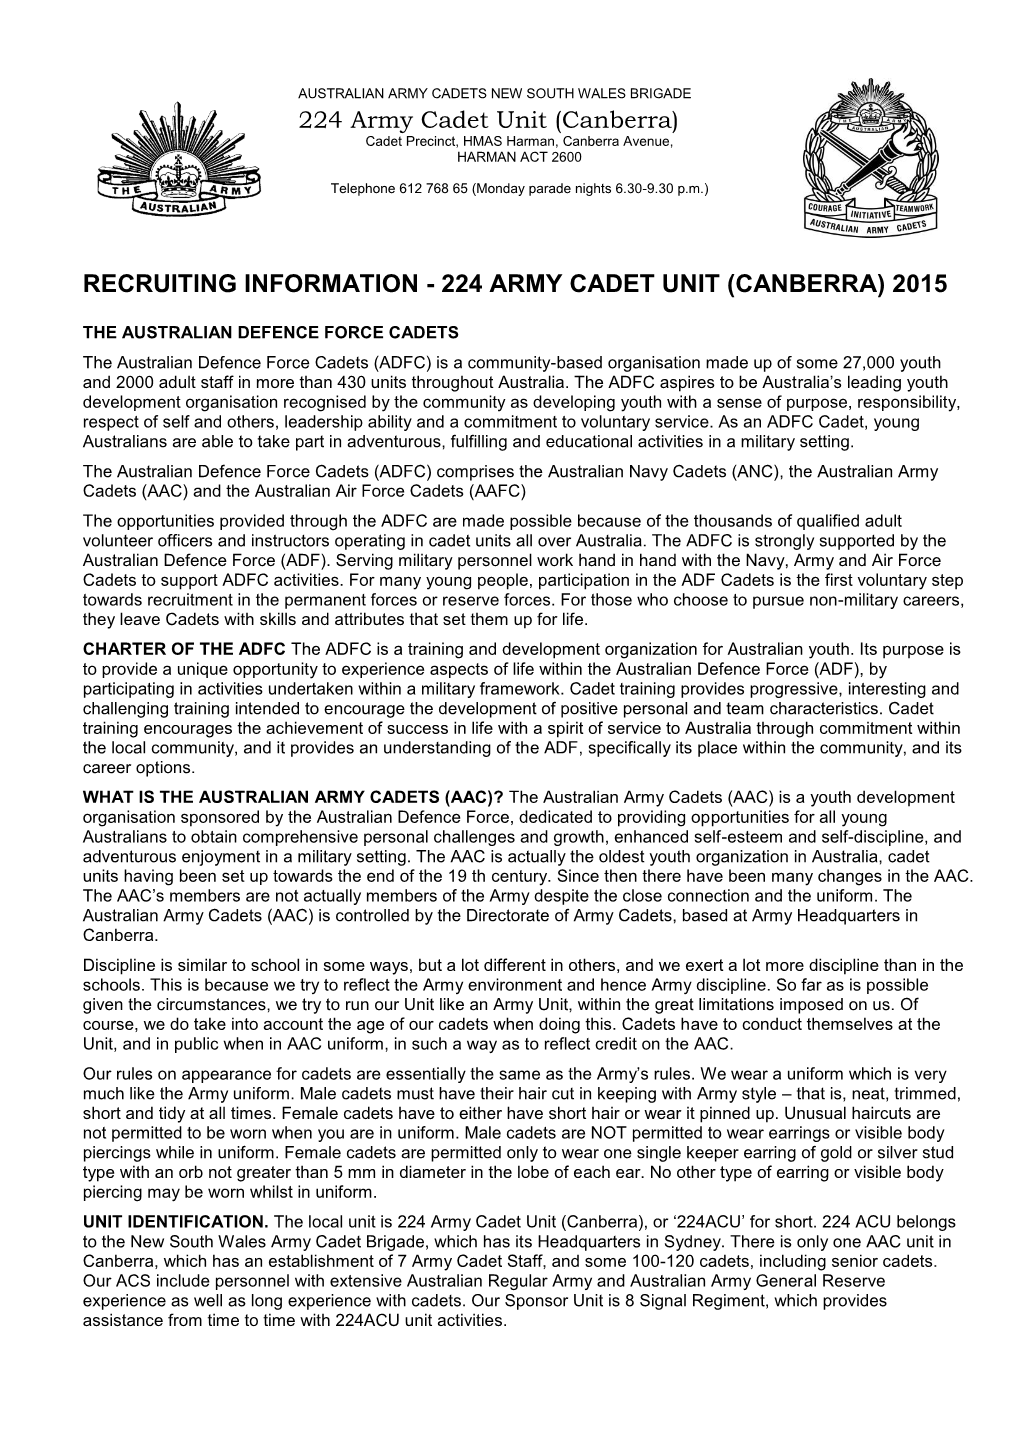 Recruiting Information - 224 Army Cadet Unit (Canberra) 2015